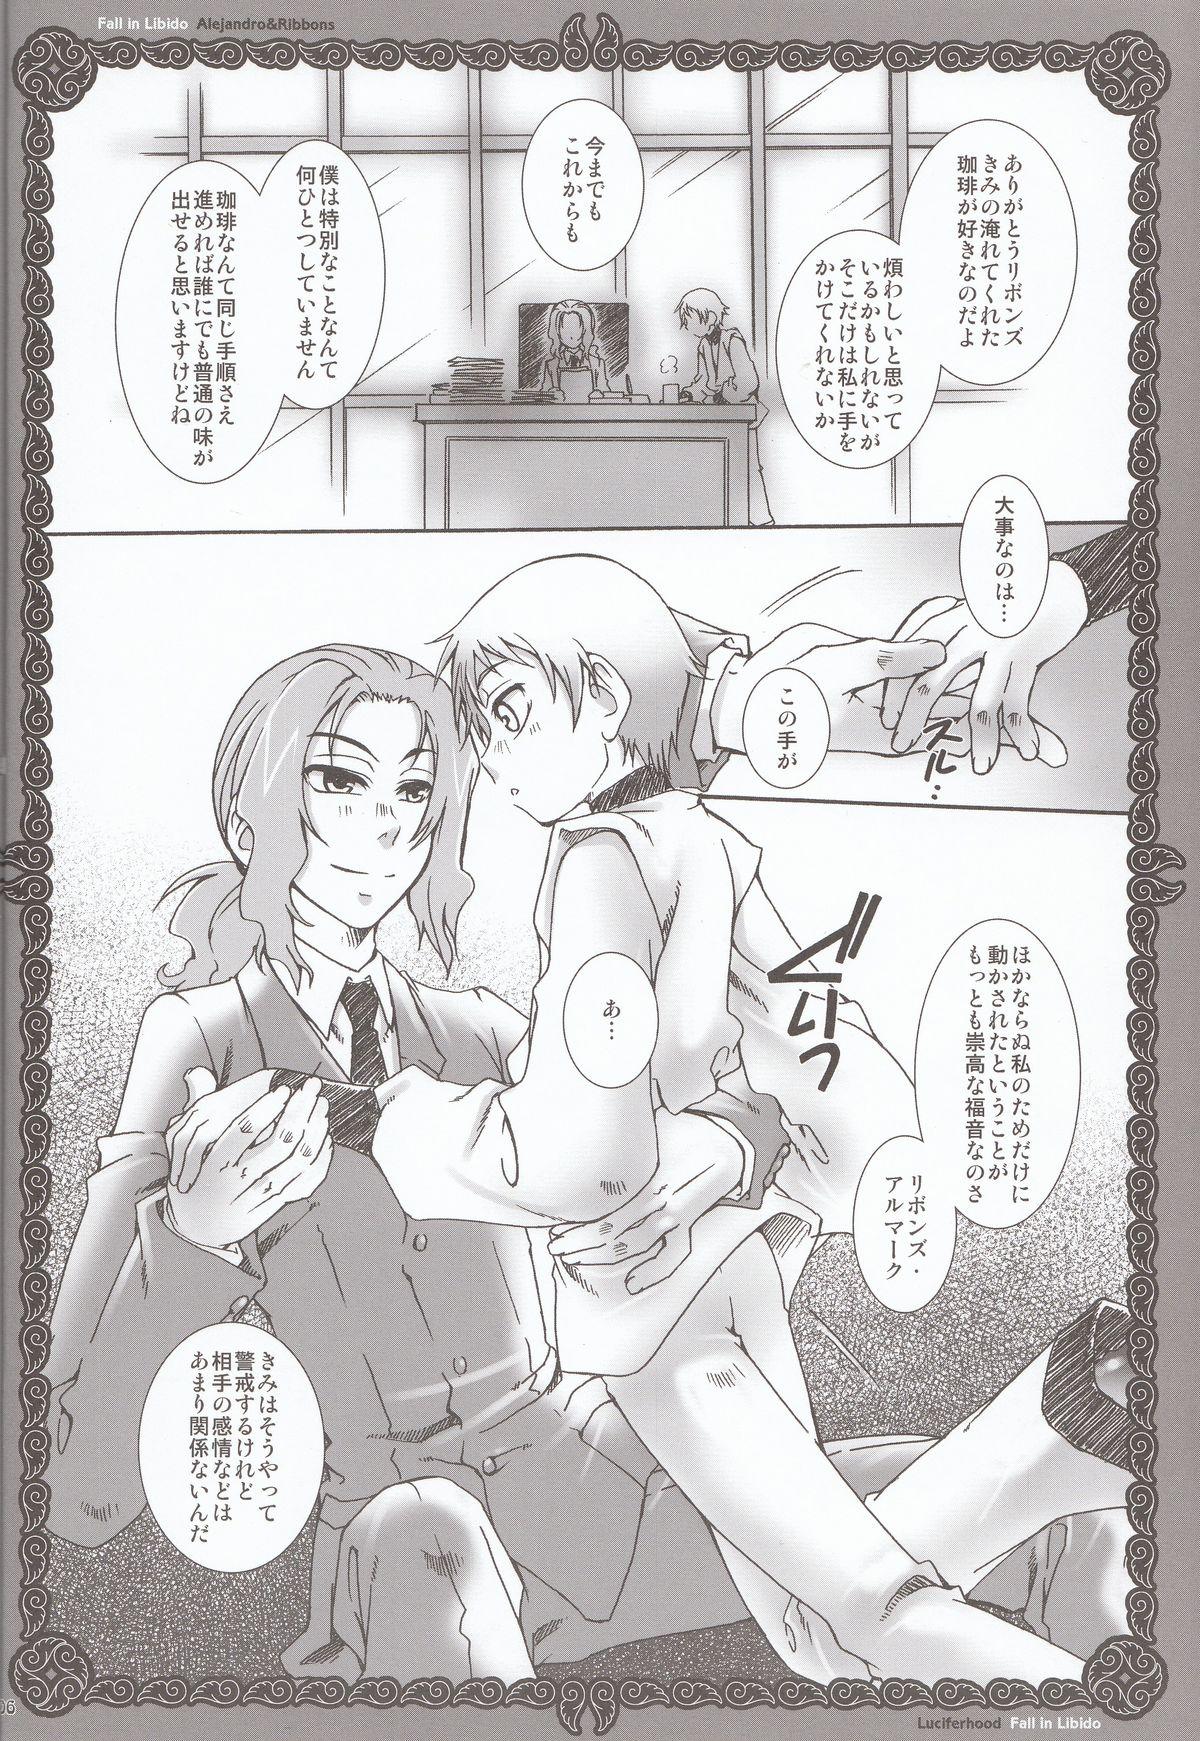 Leaked Fall in Libido - Gundam 00 Leite - Page 6